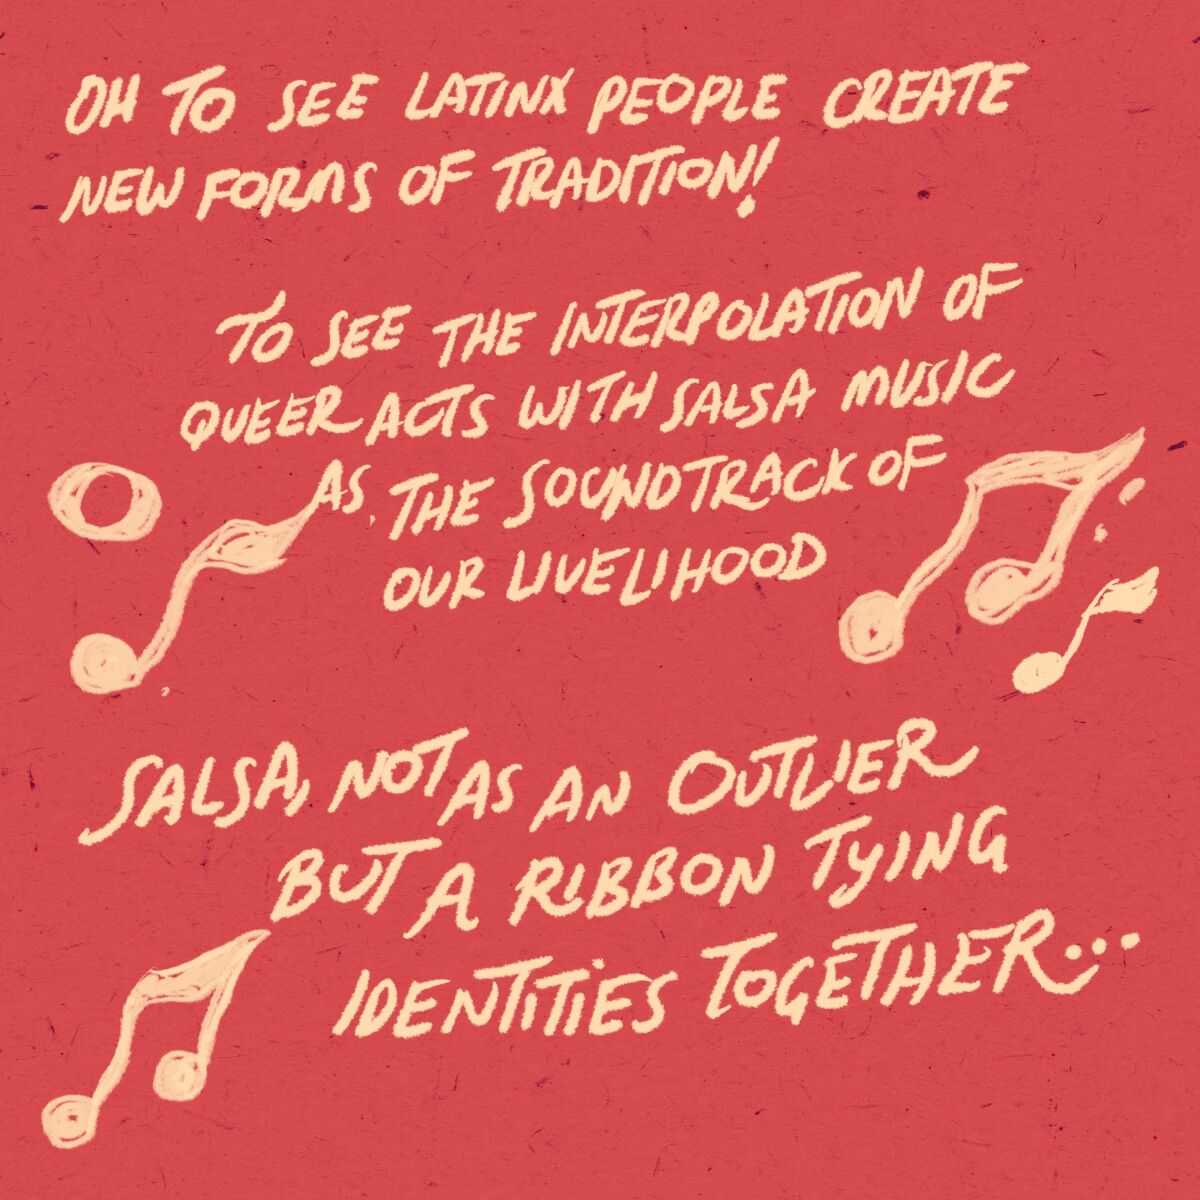 Oh to see Latinx people create new forms of tradition. Salsa, not as an outlier but a ribbon tying identities together. 